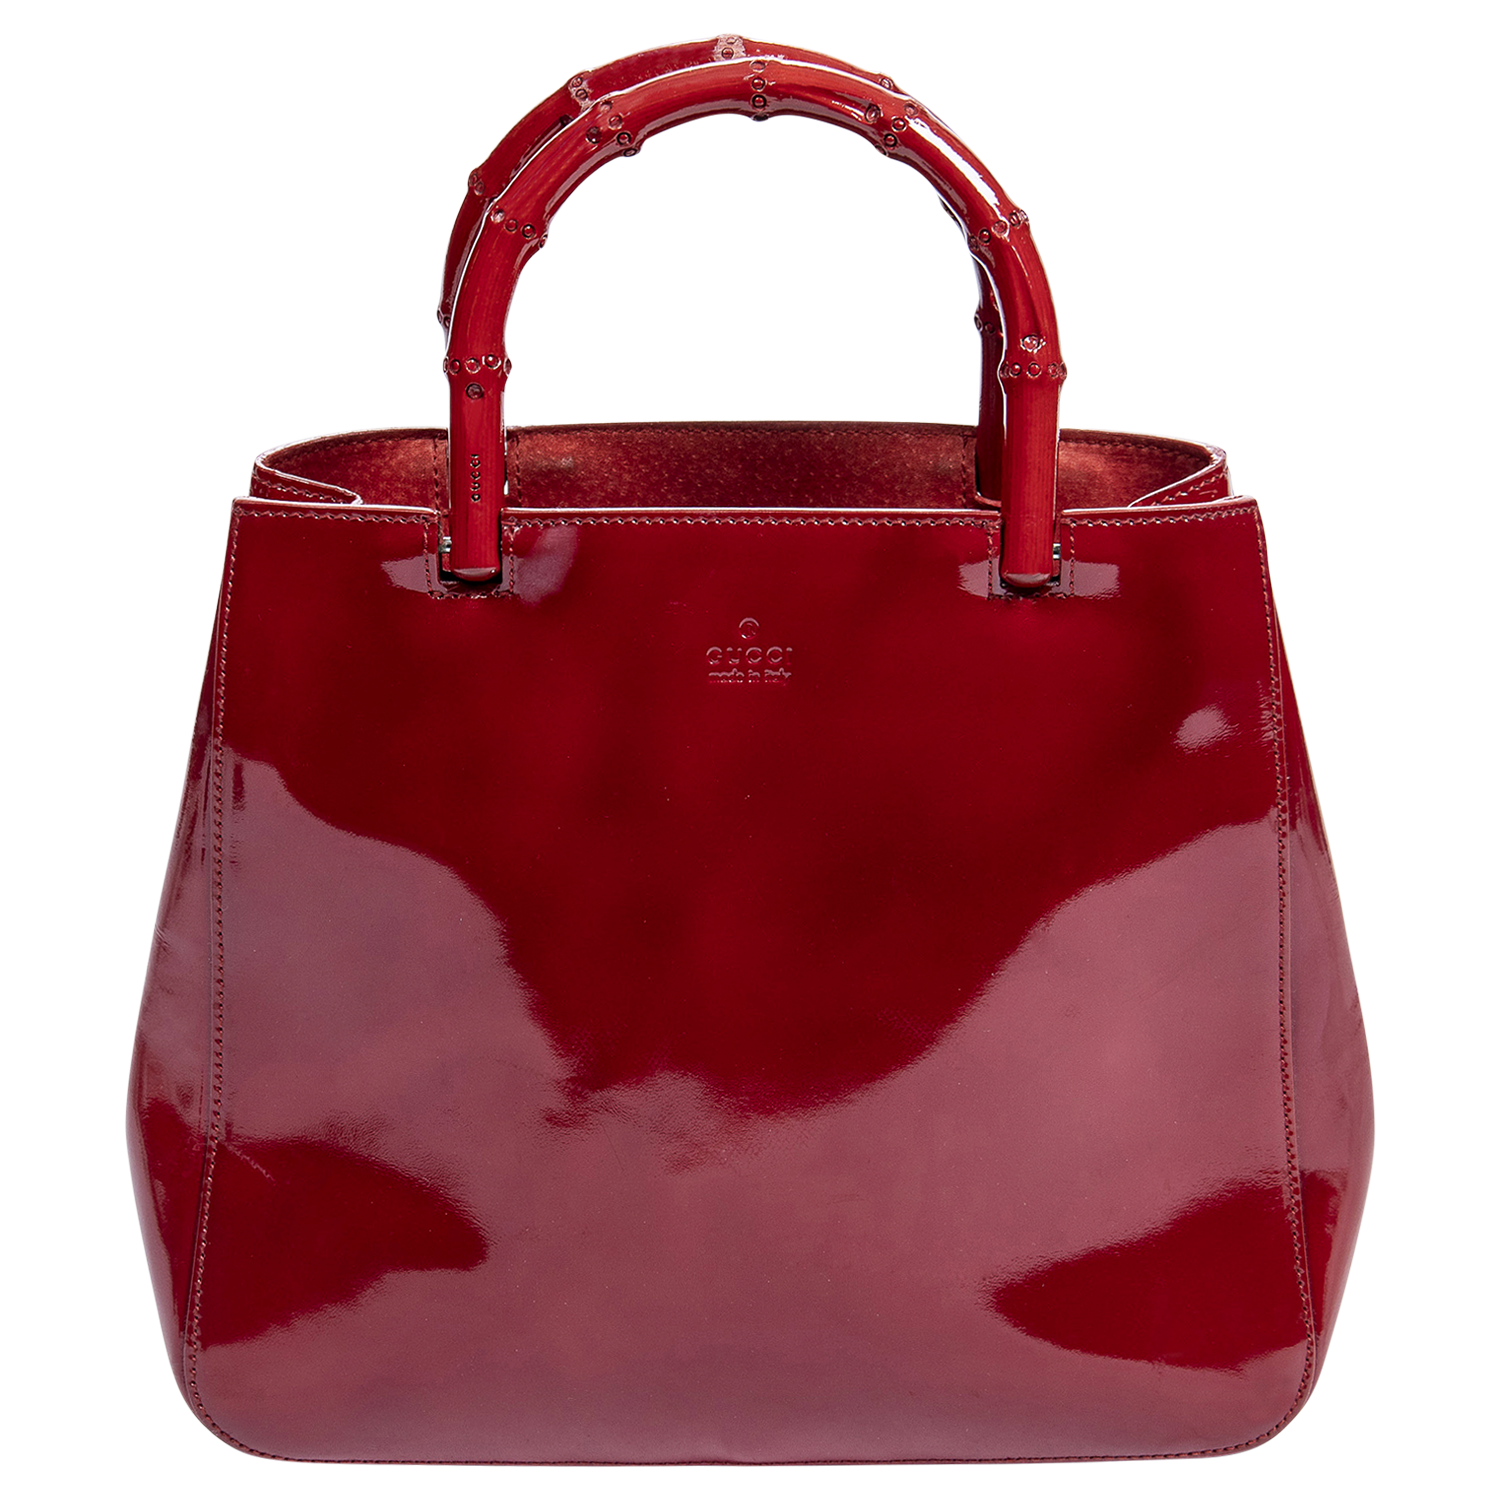 Gucci by Tom Ford Red Patent Leather Bamboo Tote